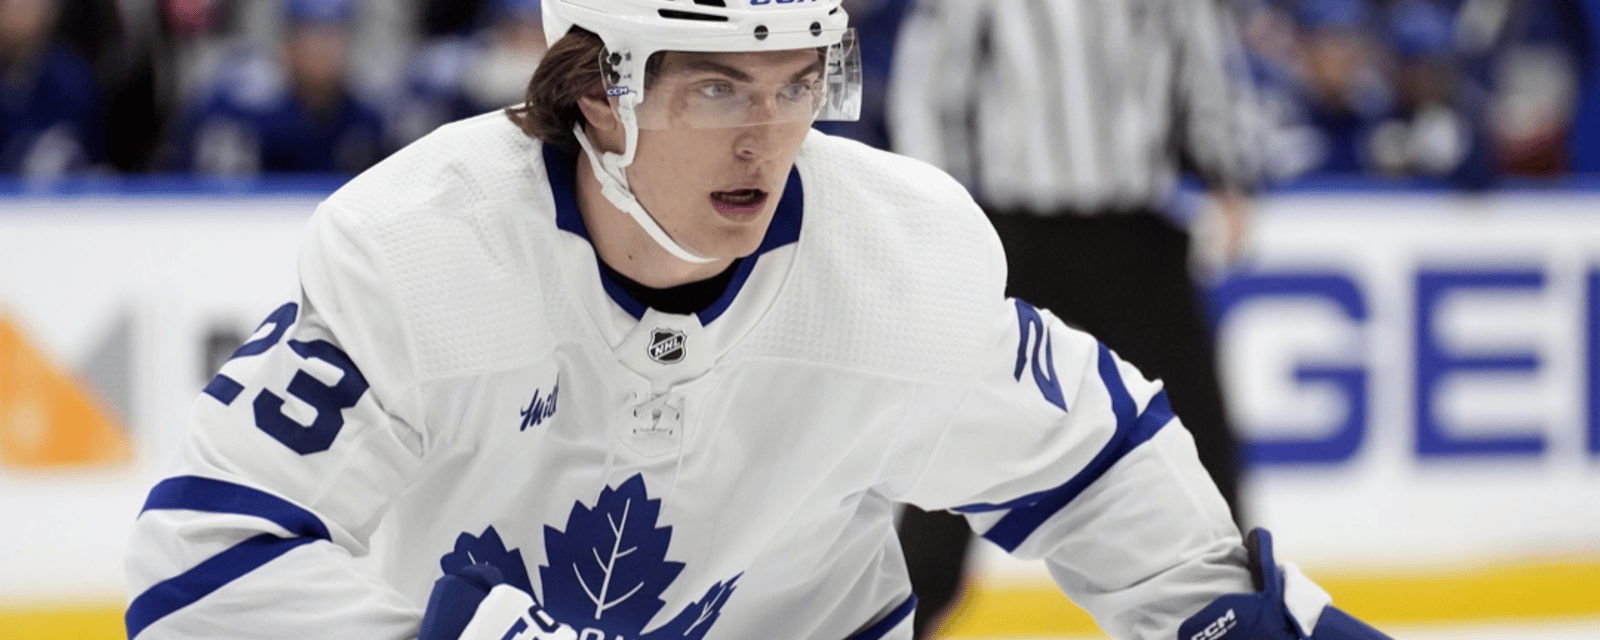 Matthew Knies has shoutout for ex-Leafs forward 